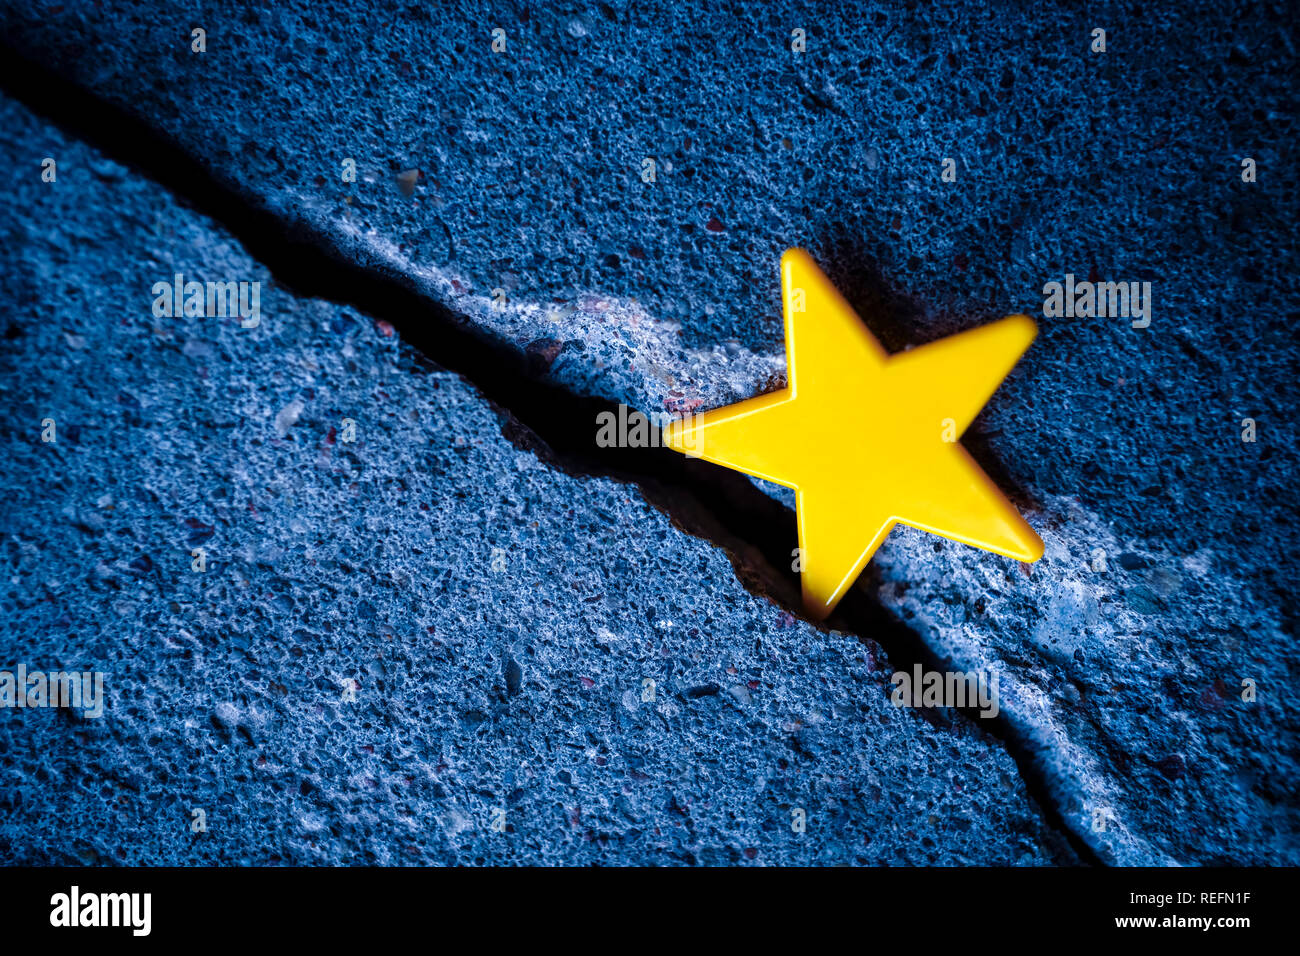 EU flag star in a gap in the ground, Brexit Stock Photo